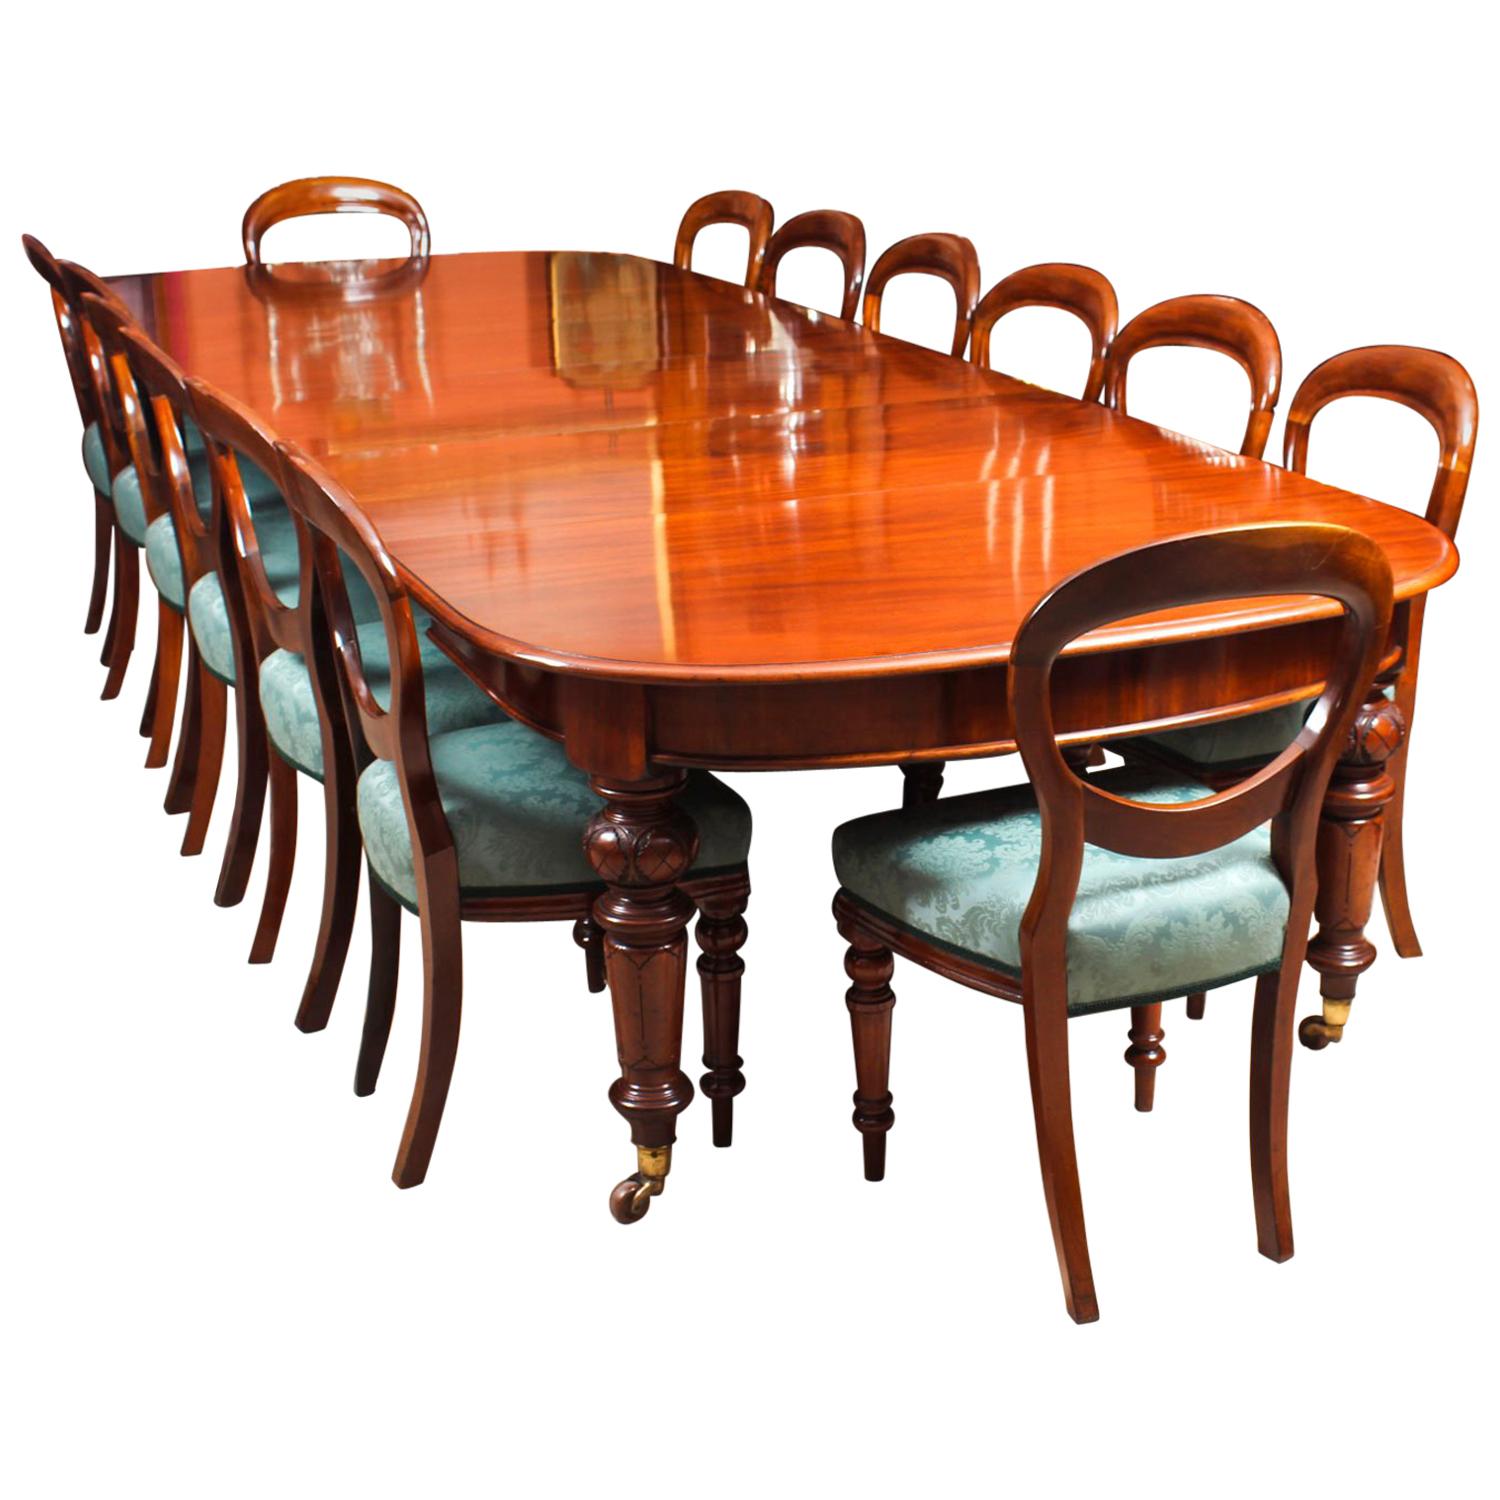 Antique 12 Ft Victorian D-End Mahogany Dining Table & 14 Chairs, 19th Century